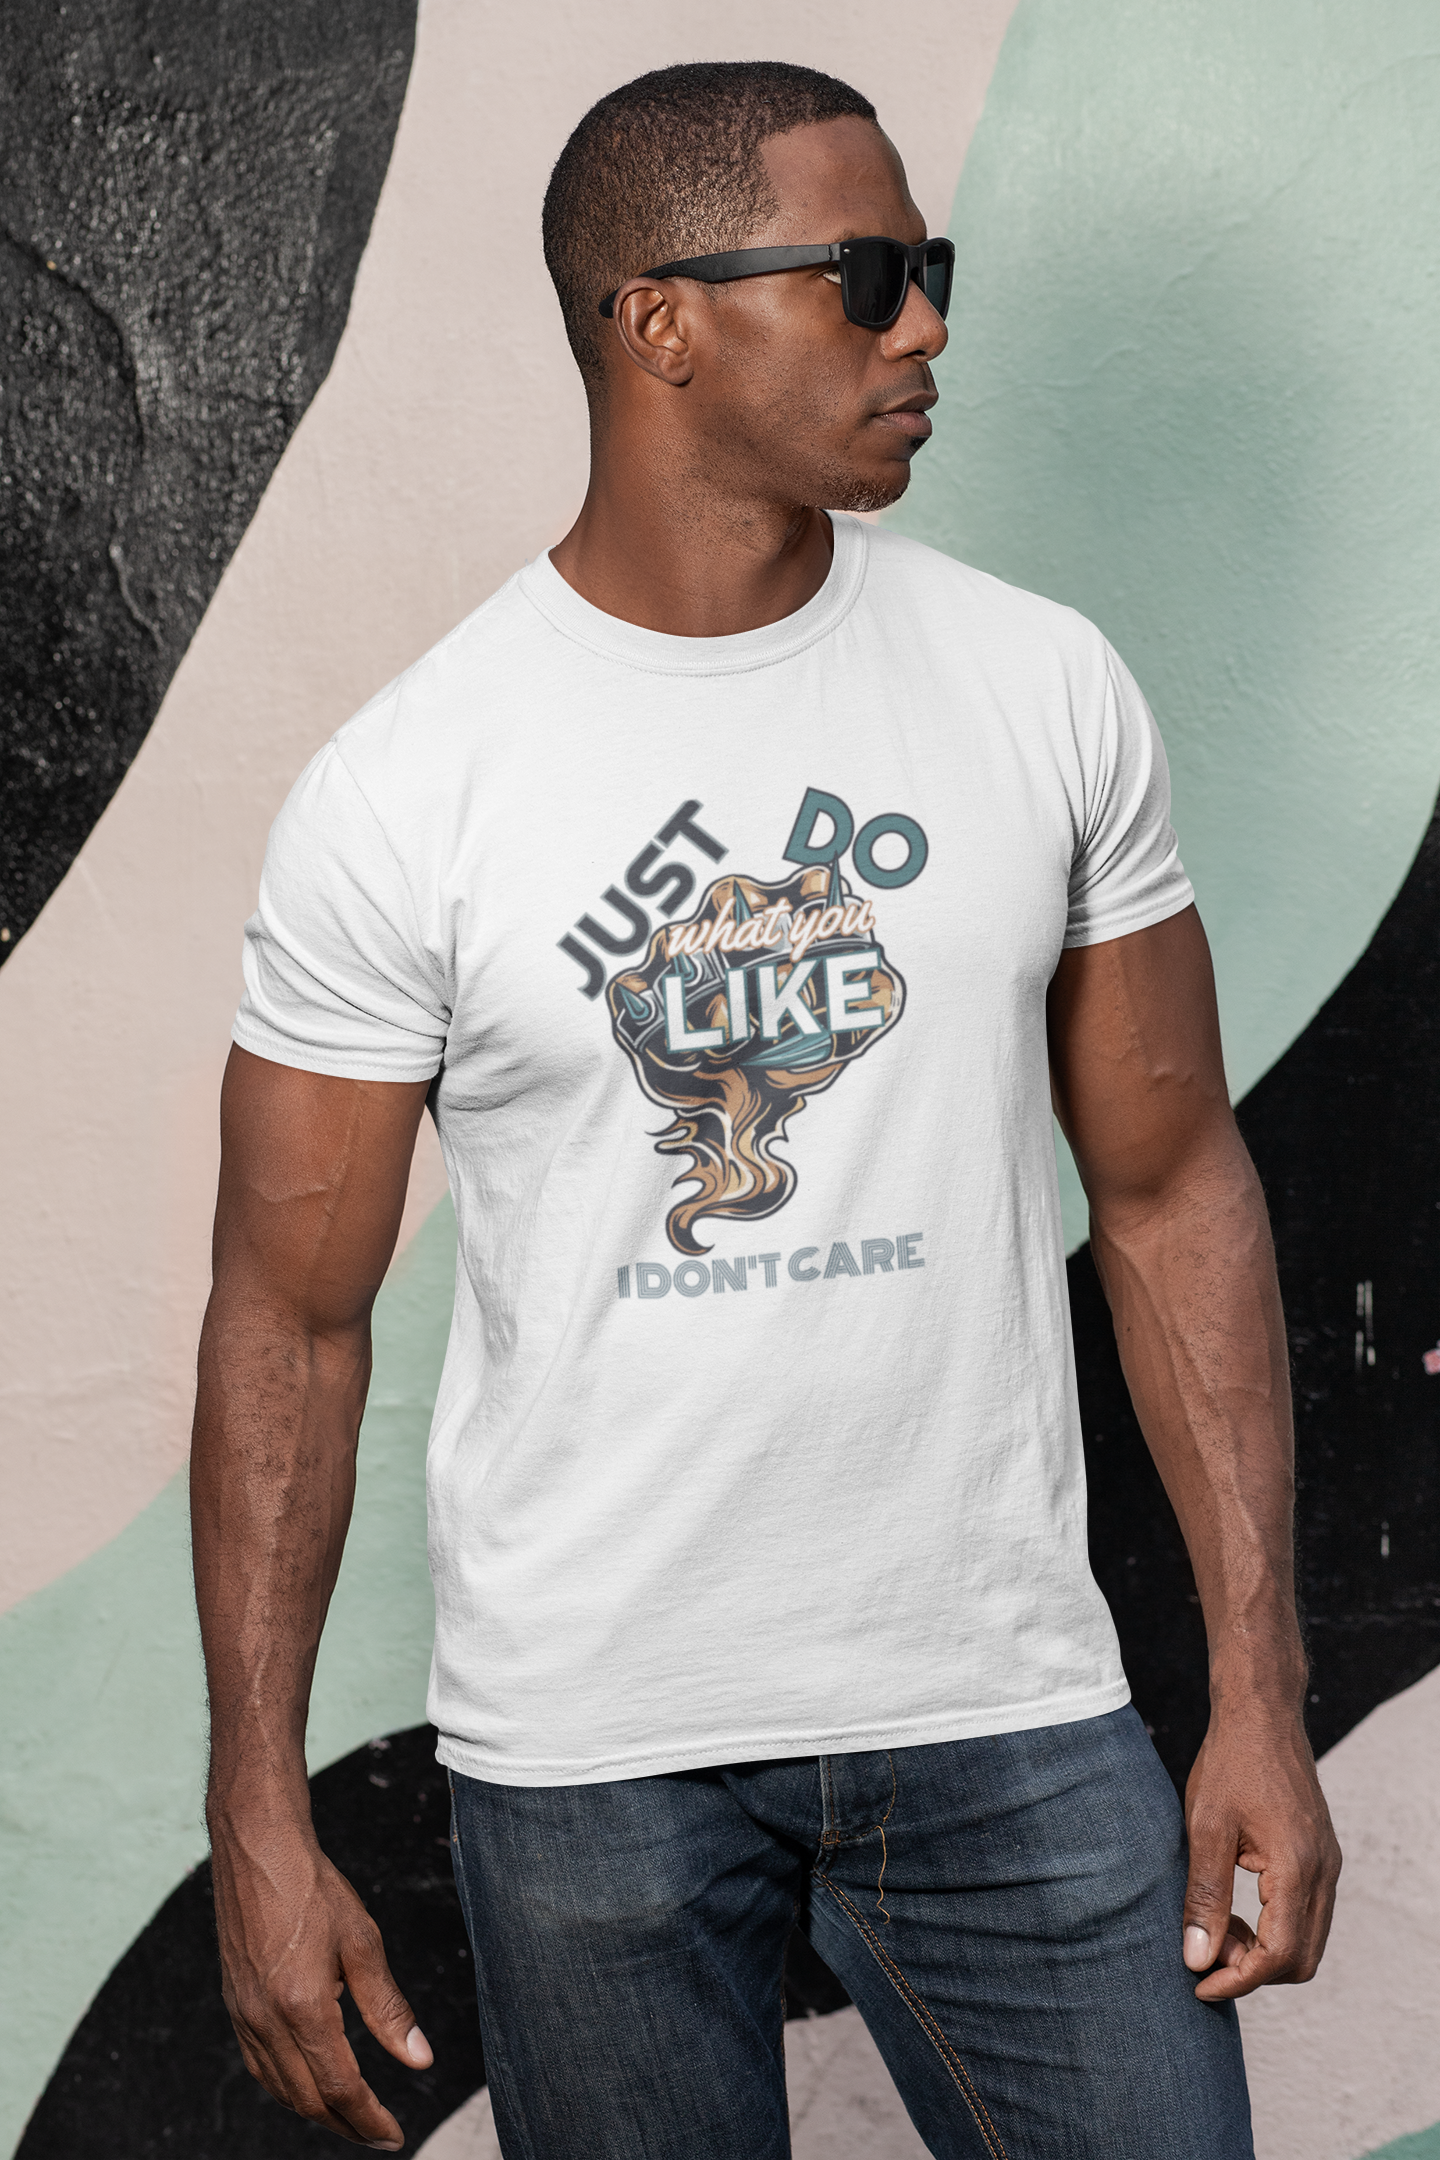 Men's Fitted Short Sleeve Tee - JUST DO WHAT YOU LIKE TO DO...I DON'T CARE